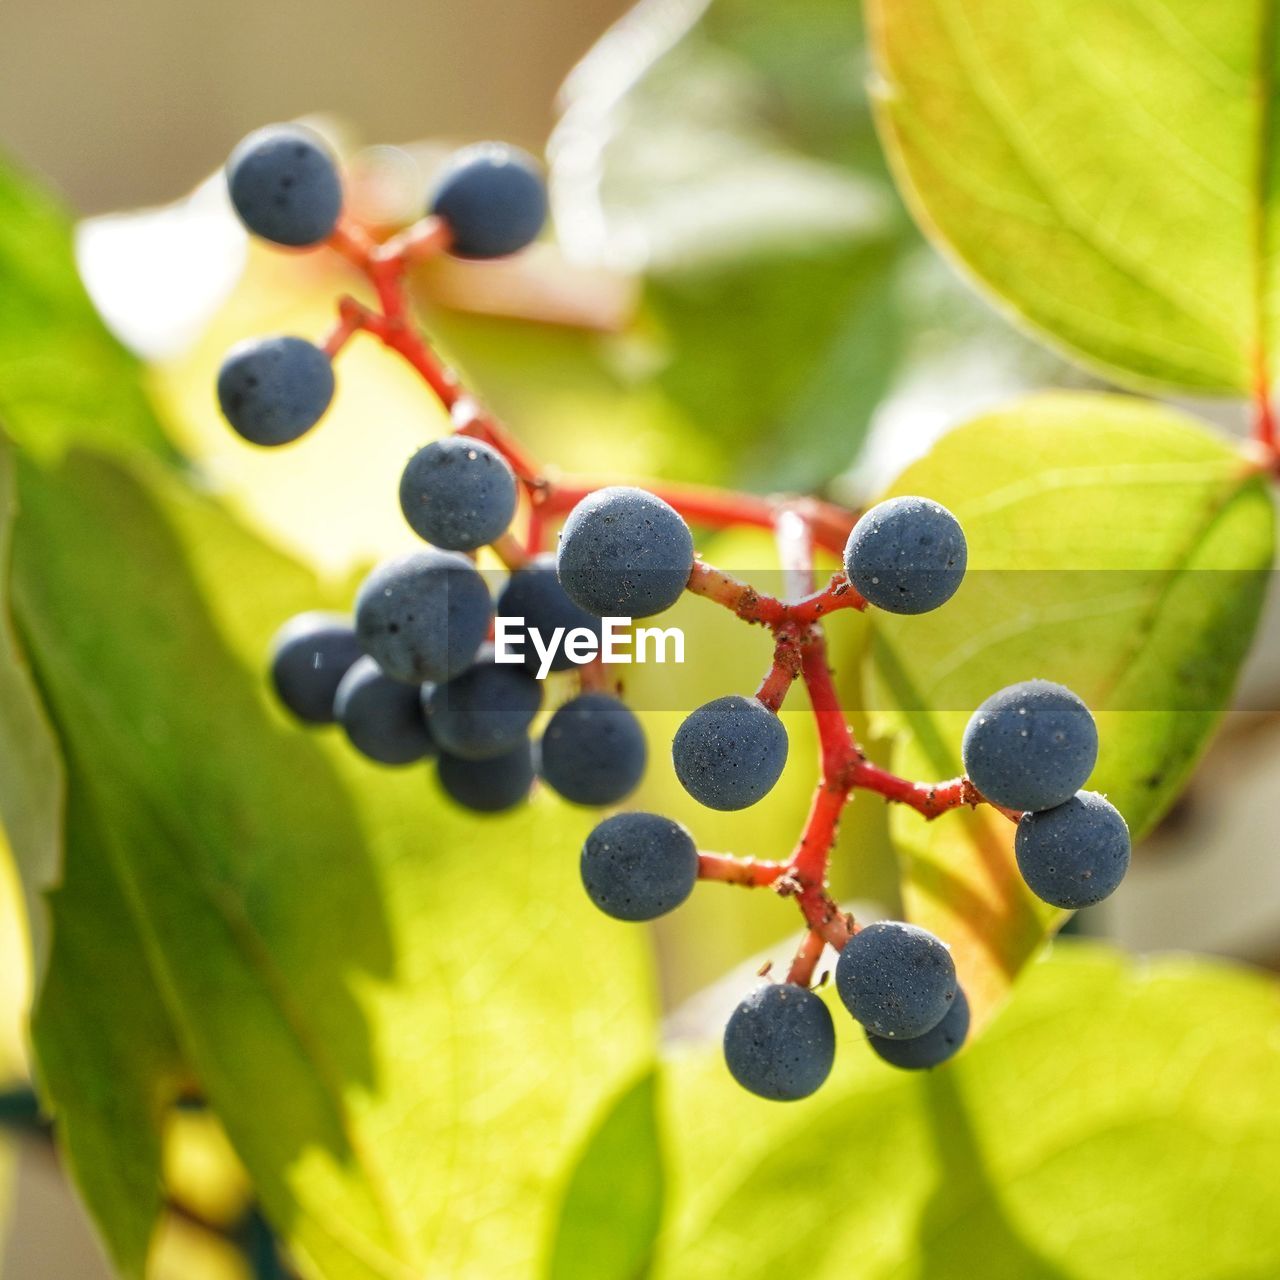 fruit, healthy eating, food and drink, food, leaf, plant part, berry, produce, plant, nature, growth, huckleberry, freshness, wellbeing, blueberry, no people, grape, close-up, agriculture, ripe, tree, vineyard, shrub, flower, branch, bilberry, juicy, green, bunch, macro photography, outdoors, crop